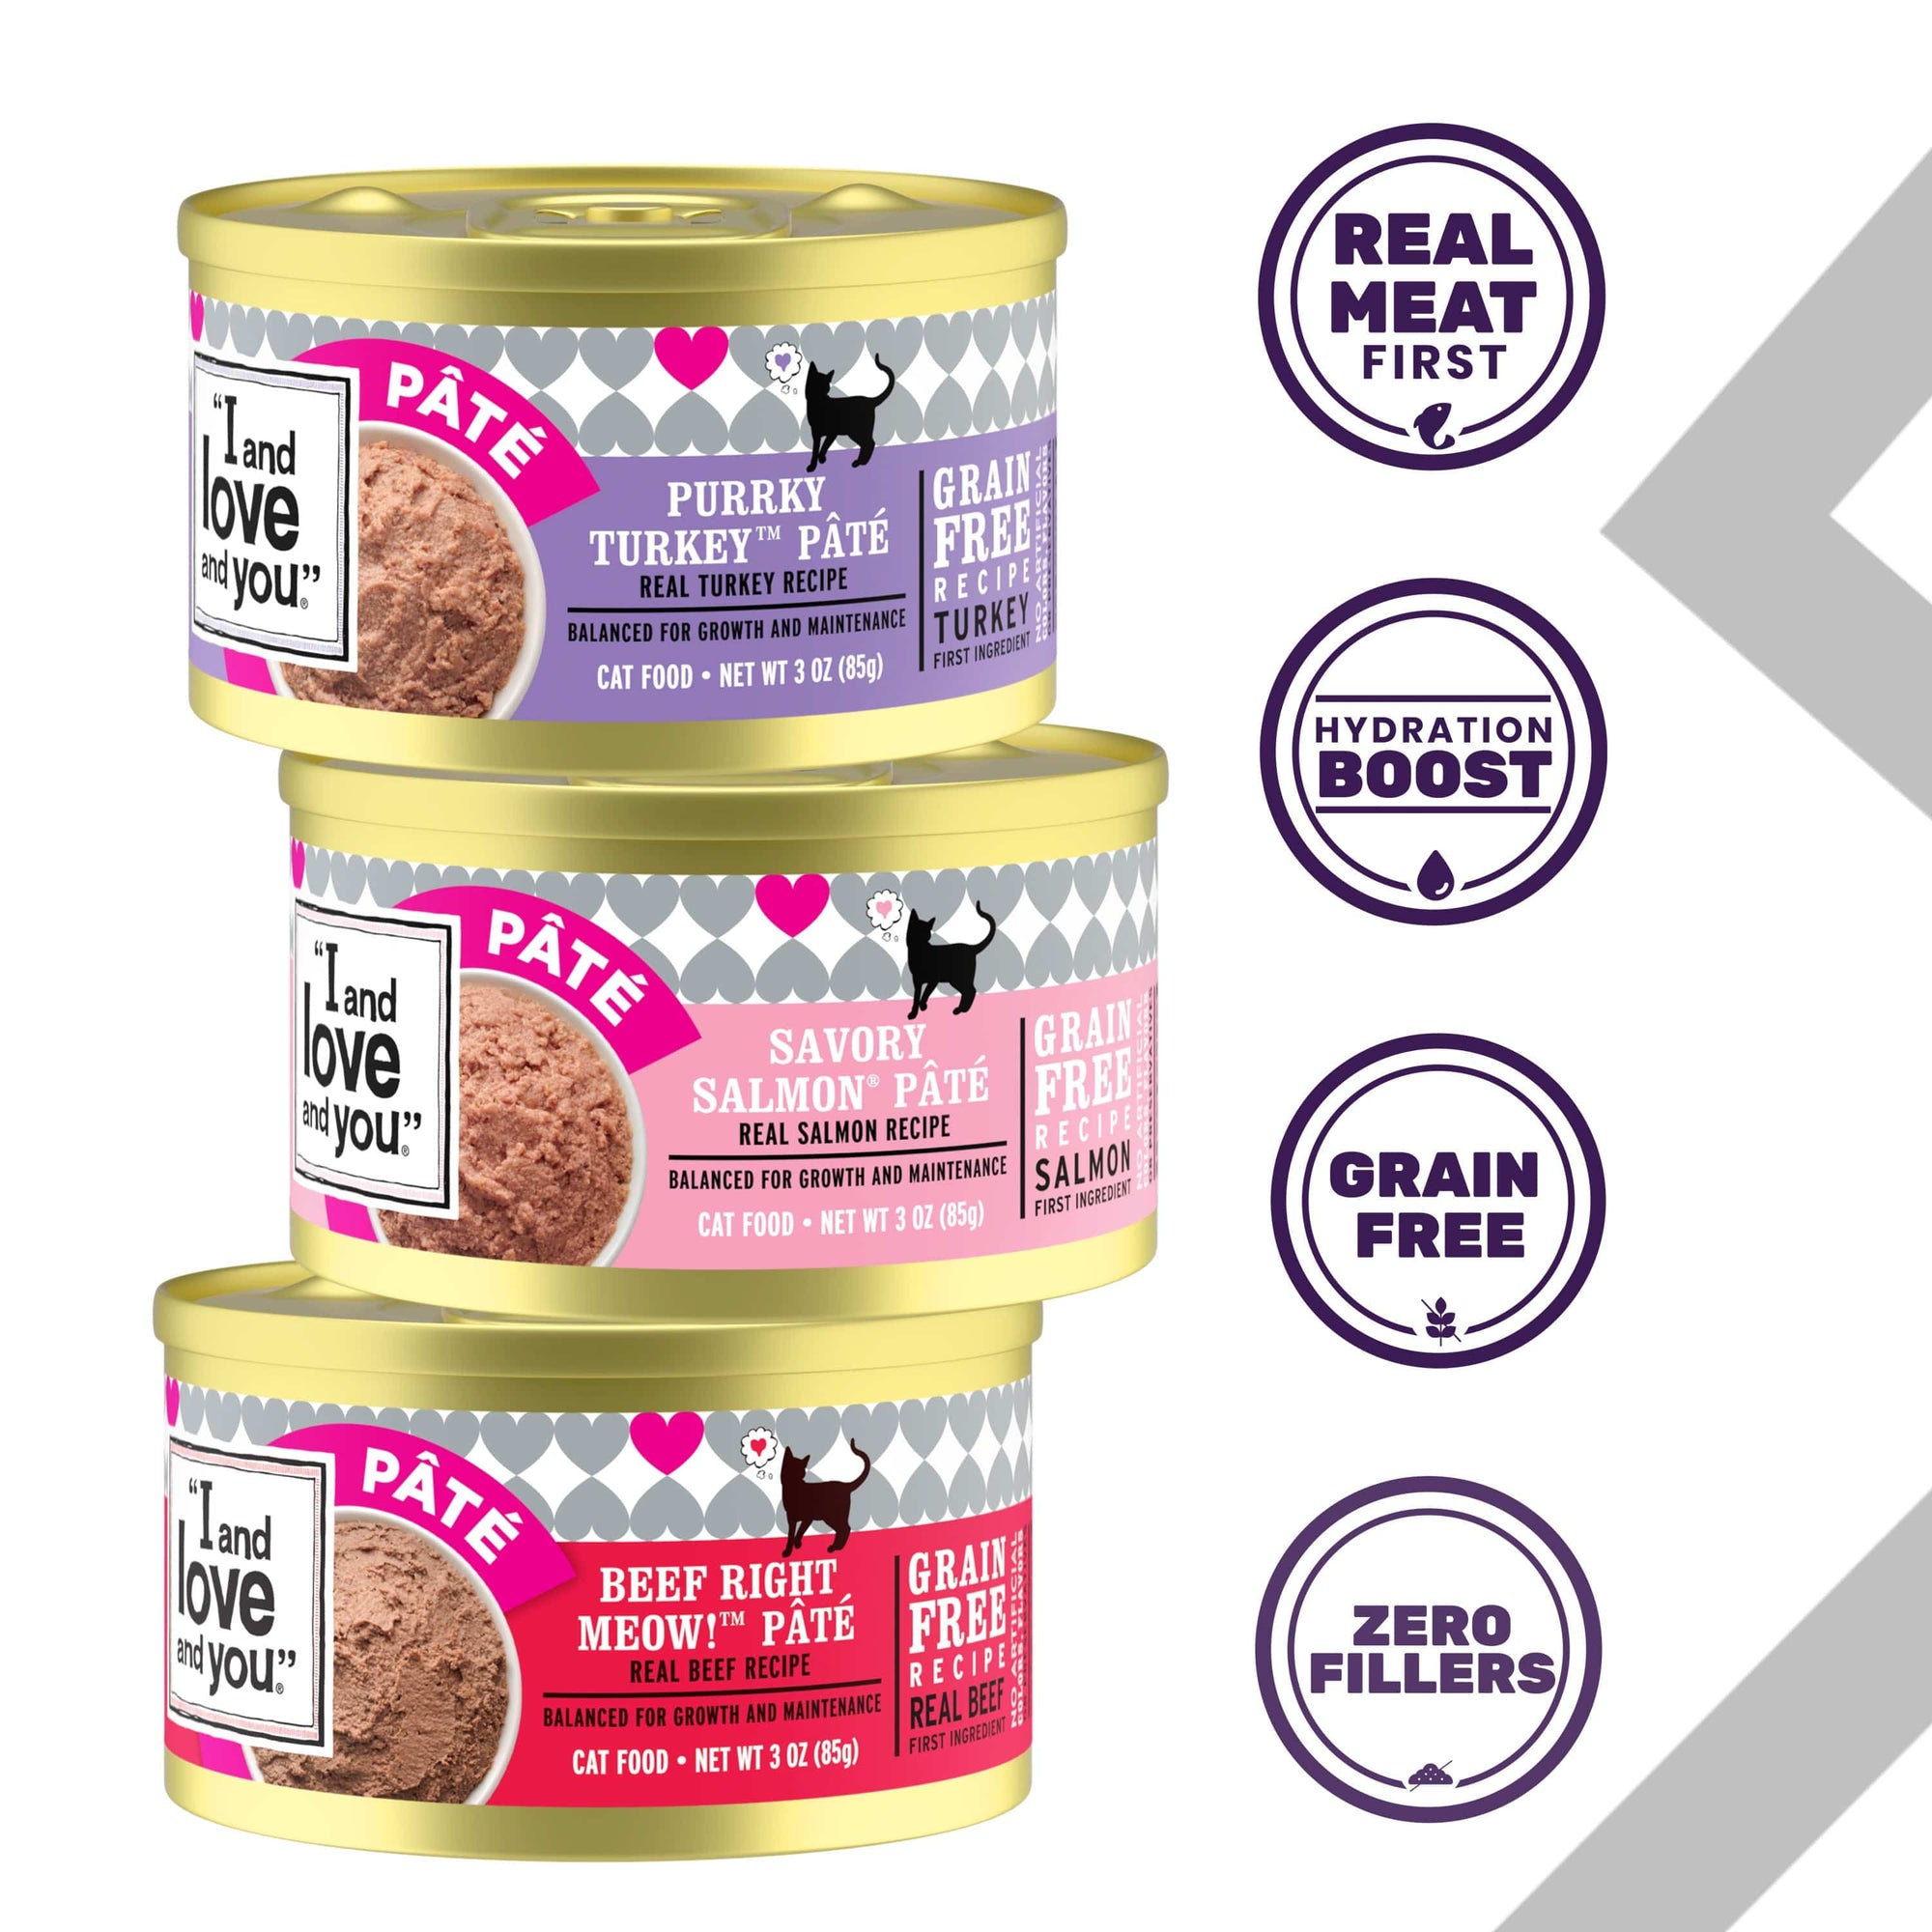 A variety of canned cat food including chicken, salmon, and turkey flavors, part of the Original Recipe - Cat Can Variety Pack - Farm To Sea showcasing product features such as real meat first, hydration boost, grain free and zero fillers.